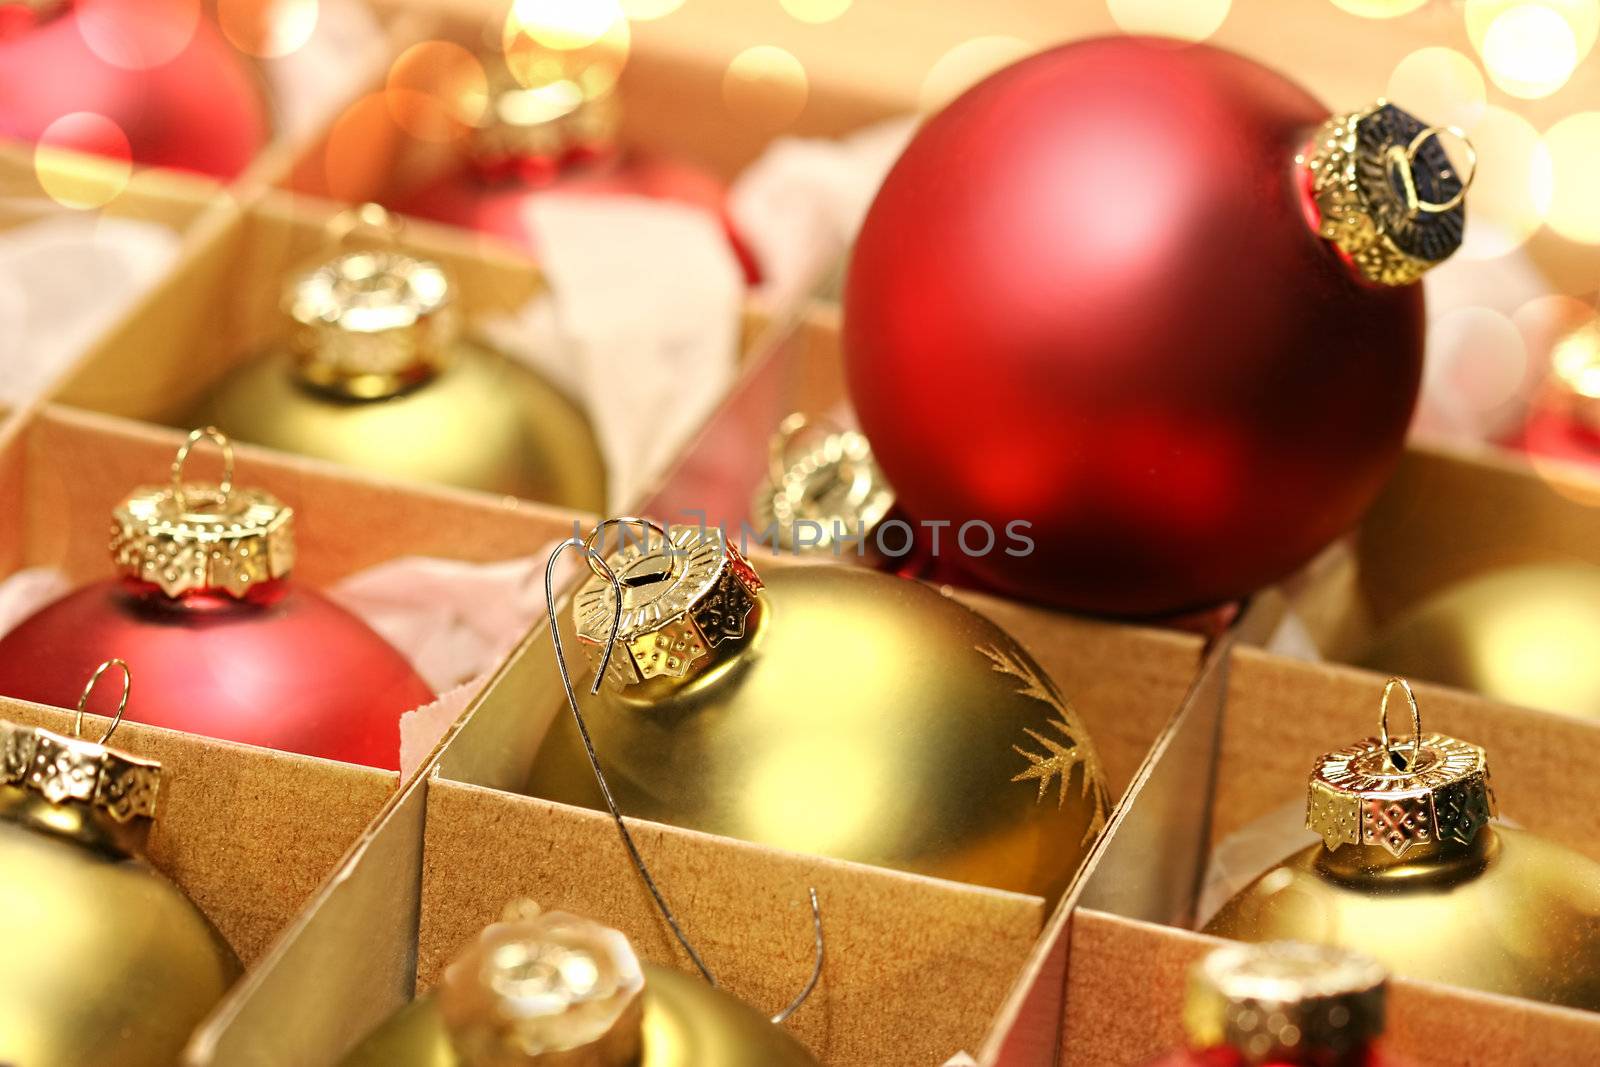 Collection of Christmas balls in box with wrapping